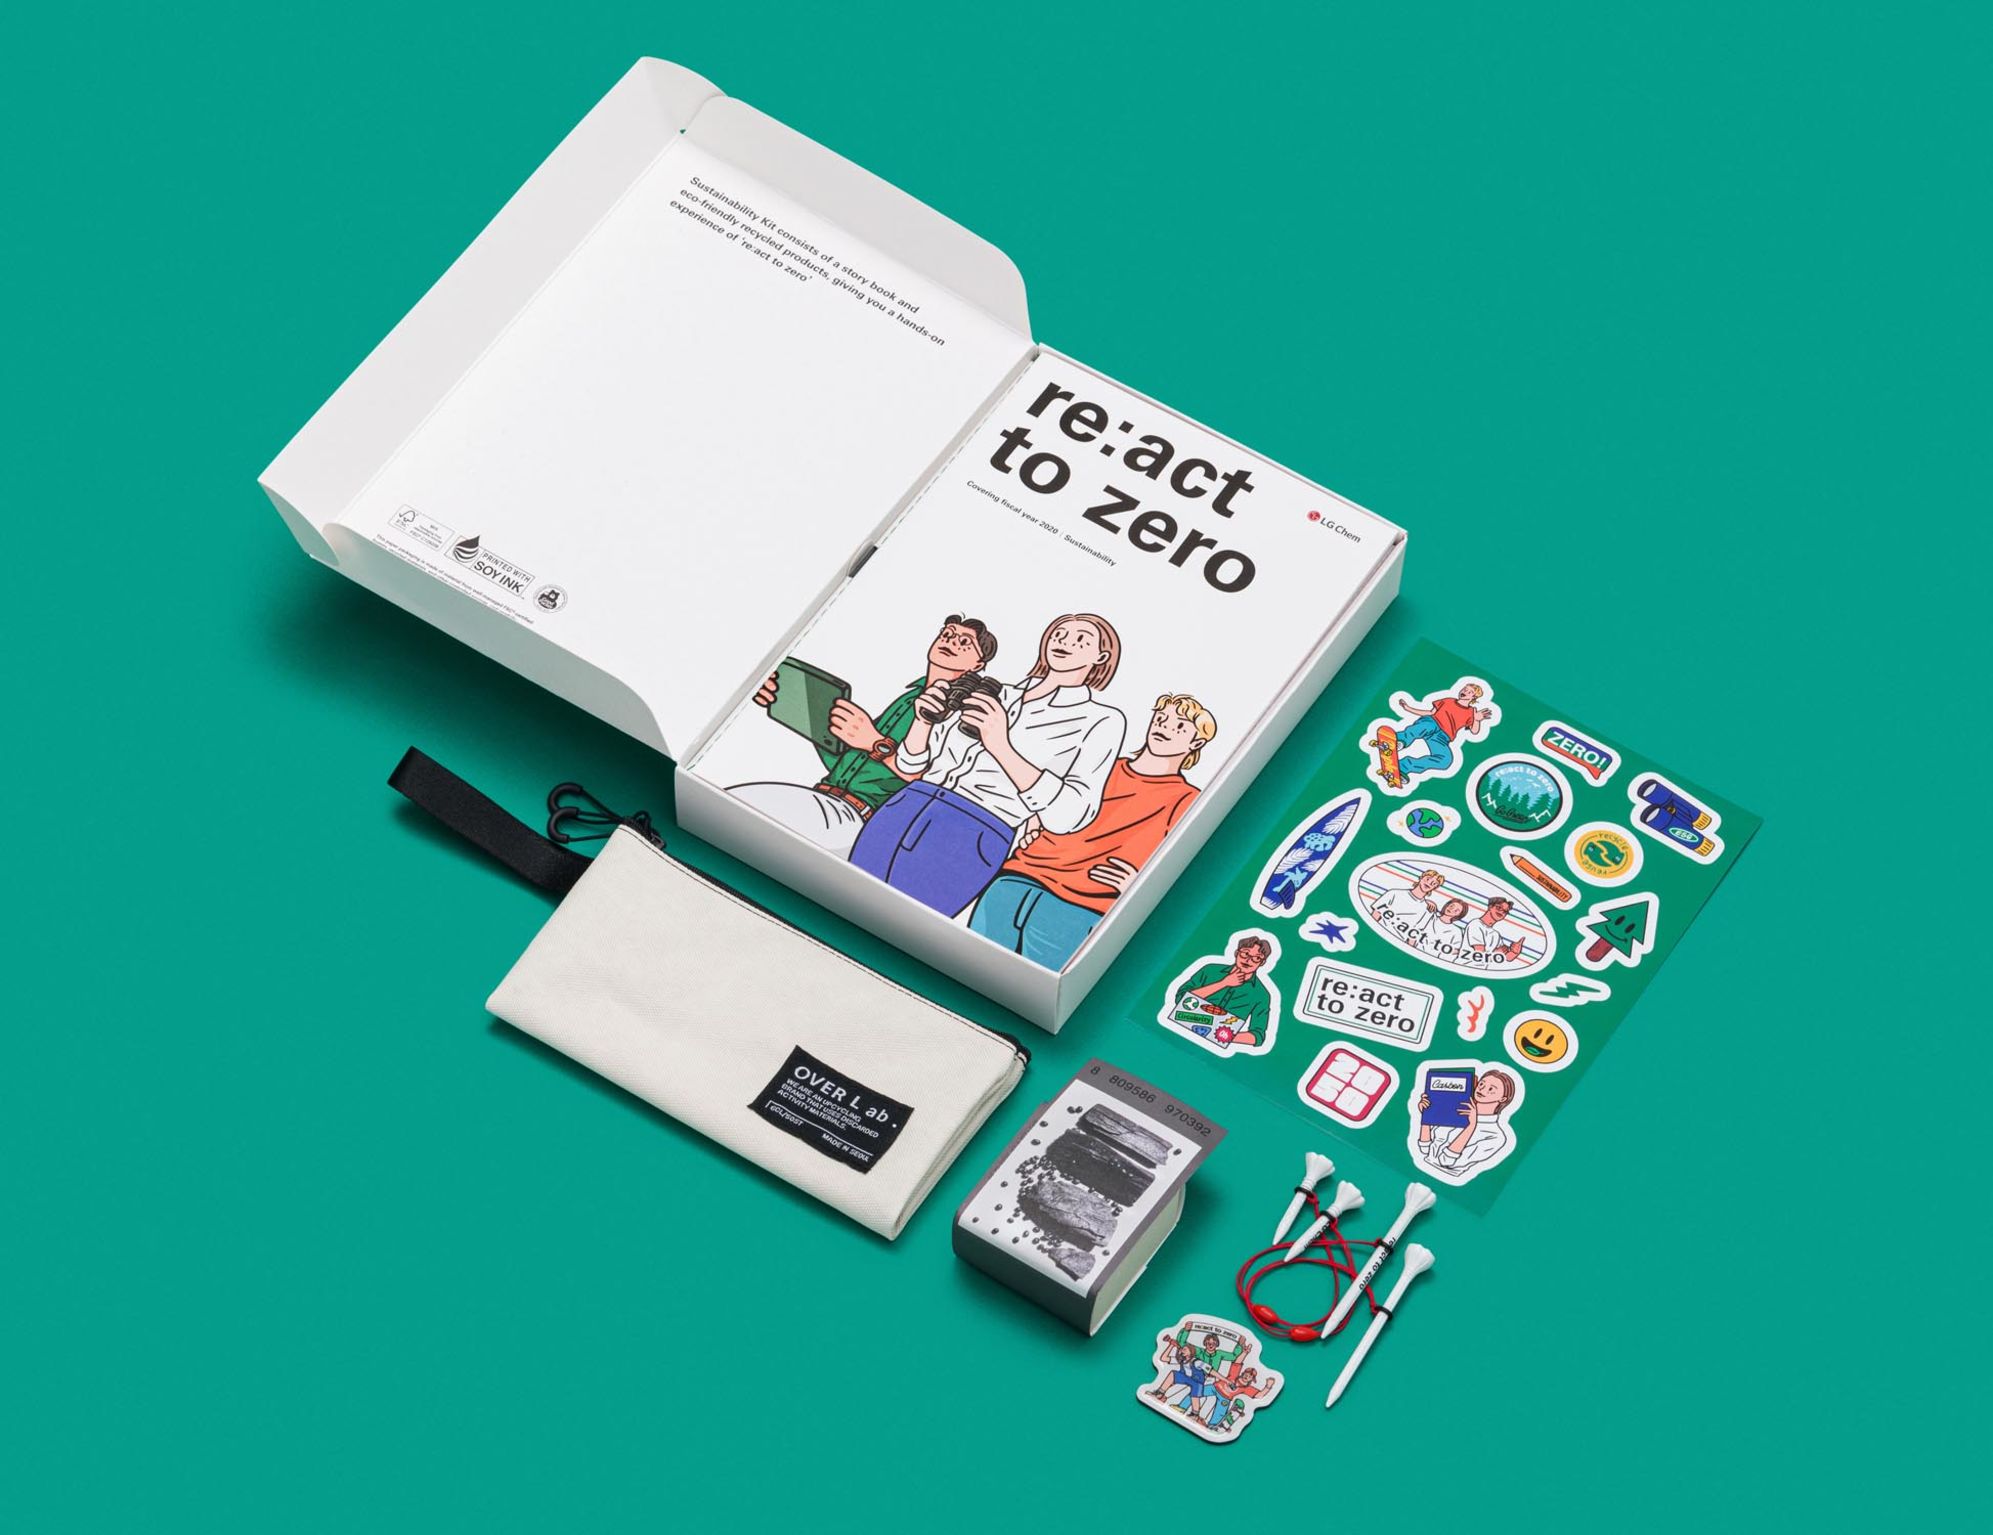 Sustainability Report & Kit by LG chem